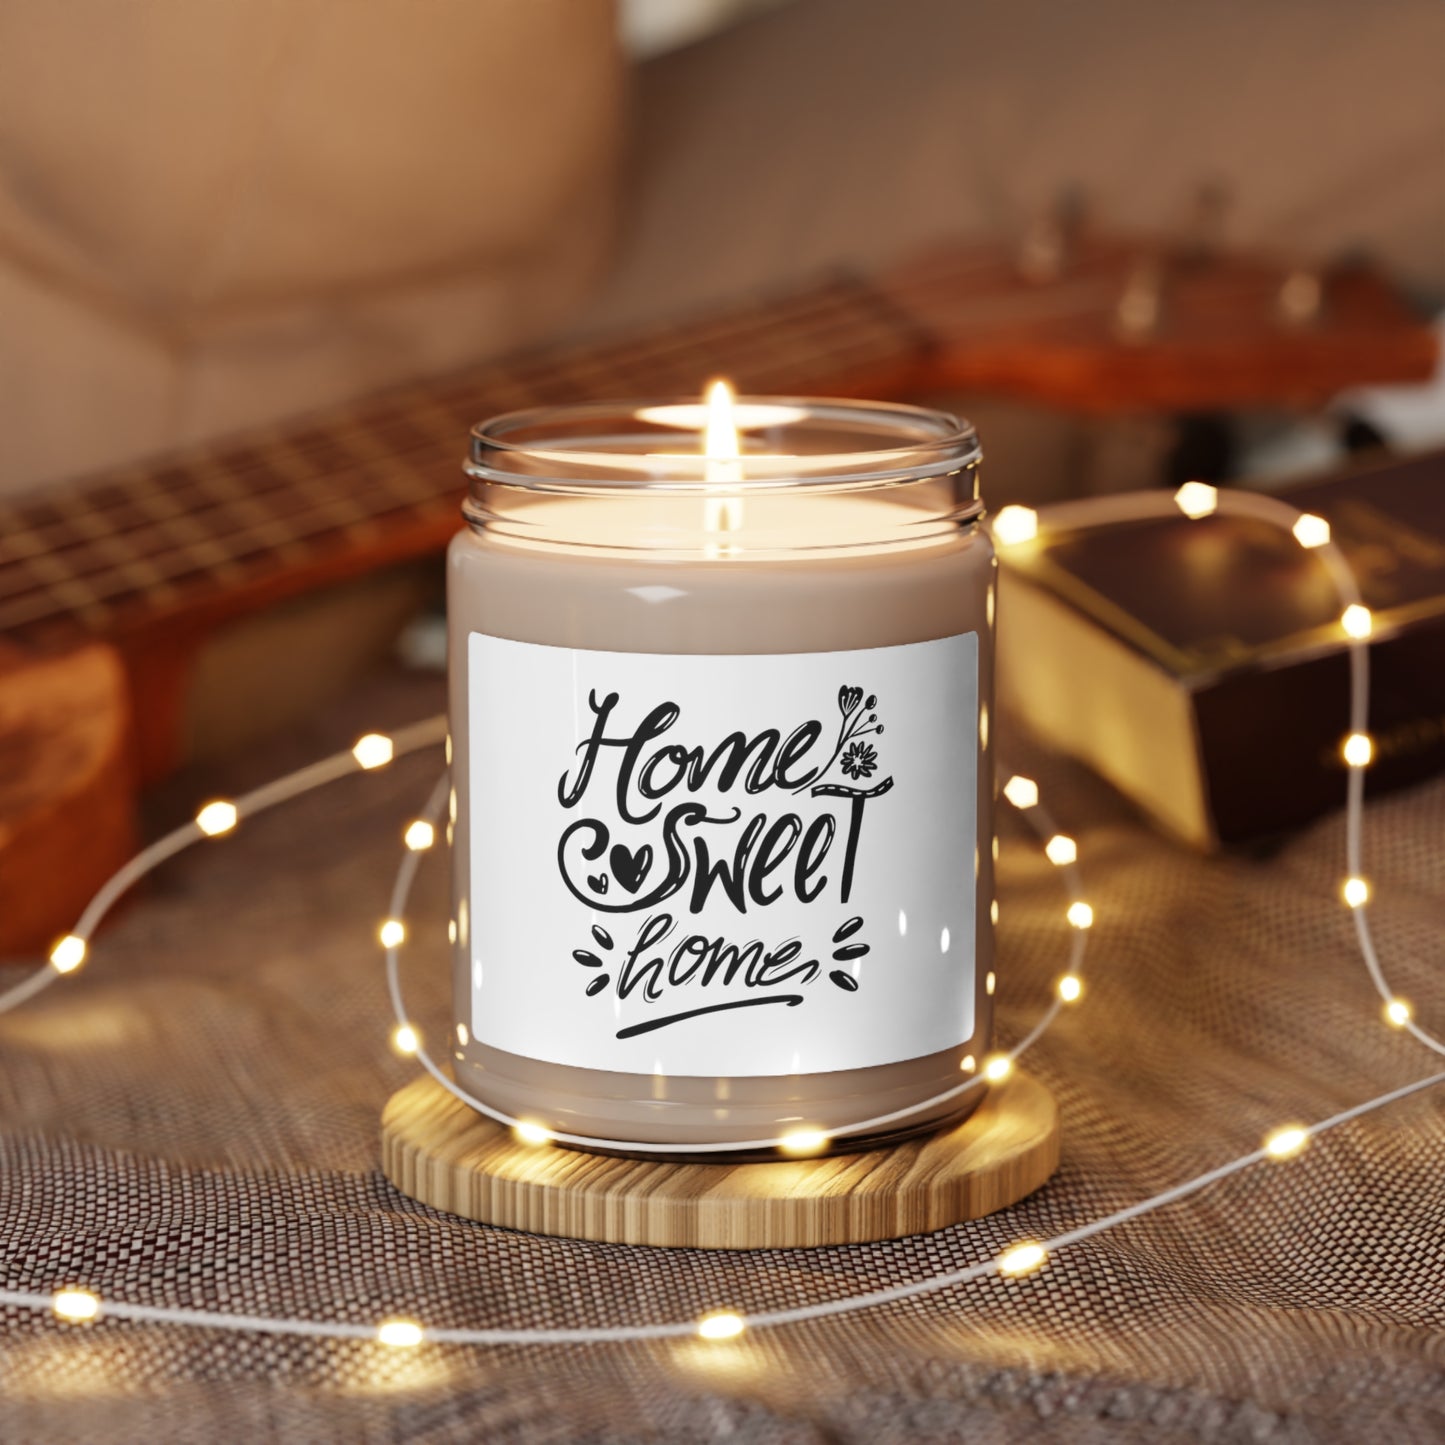 Home sweet home Scented Soy Candle 9oz